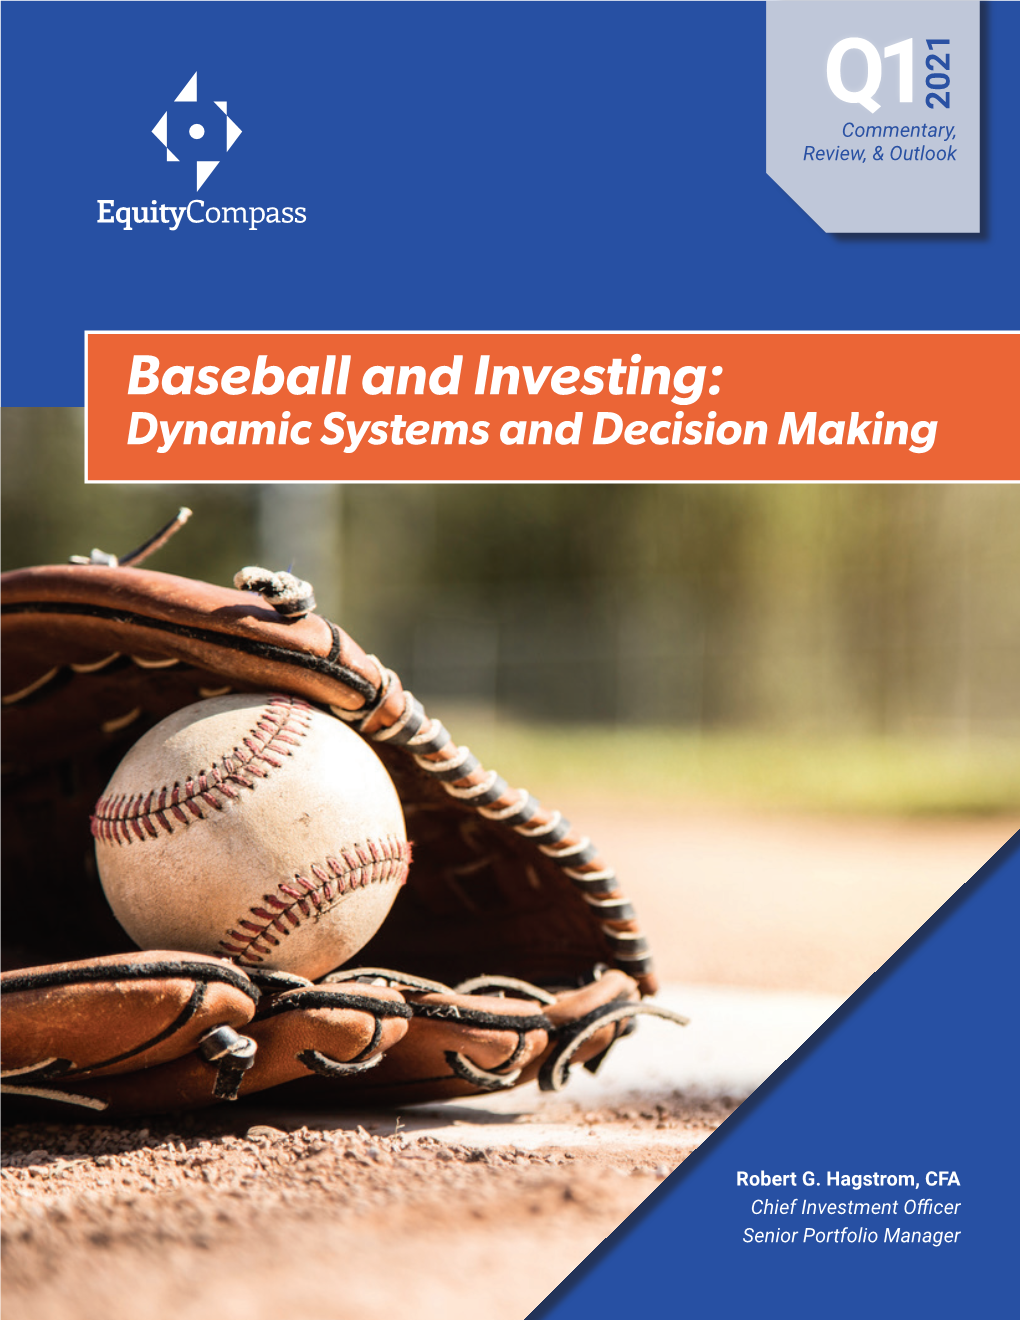 Baseball and Investing: Dynamic Systems and Decision Making